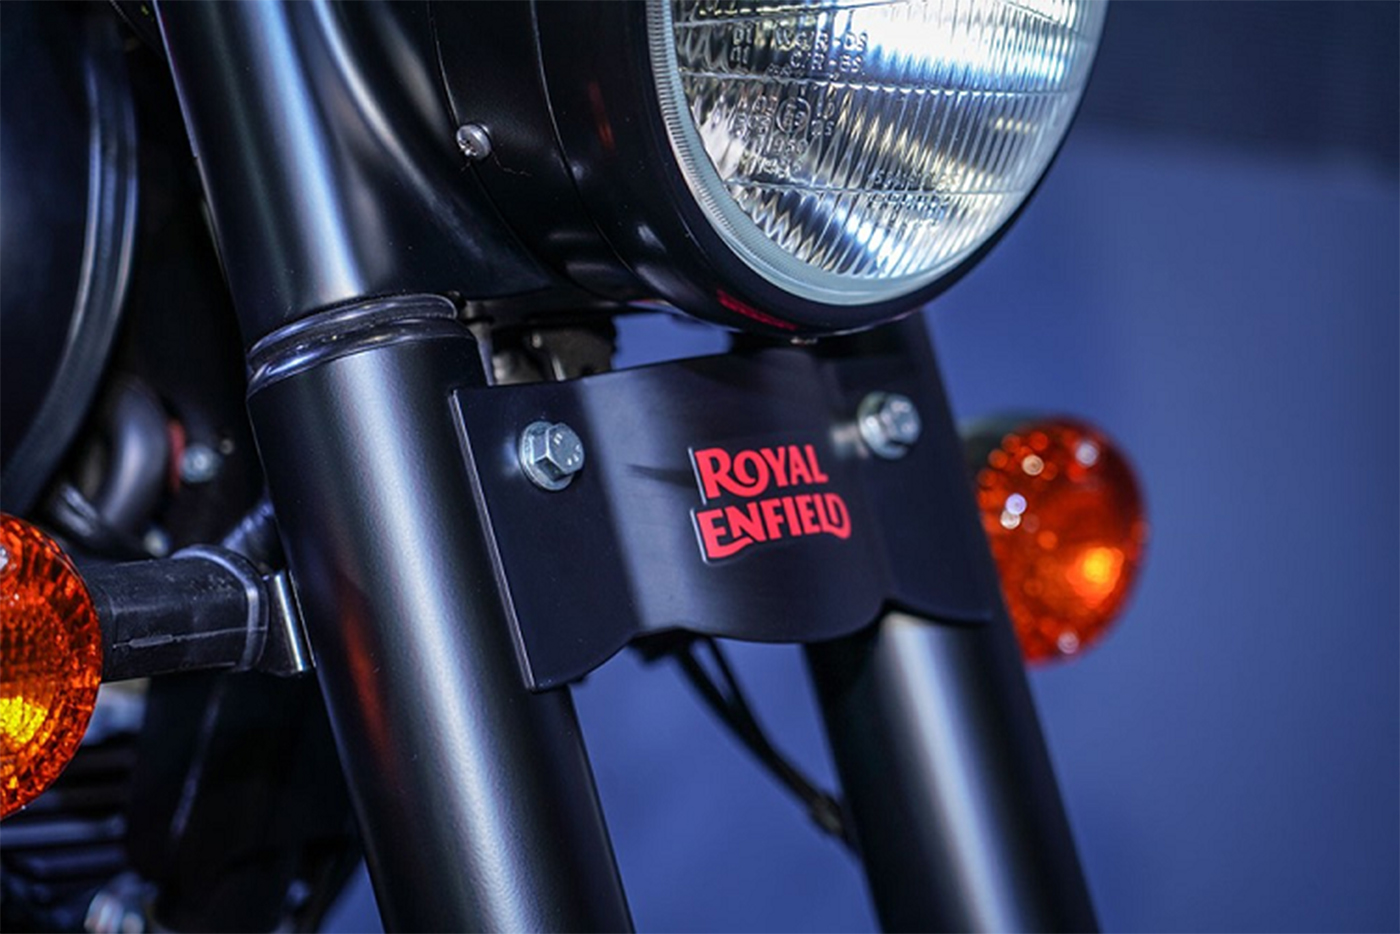 royal-enfield-classic-500-stealth-black-limited-edition-1.jpg